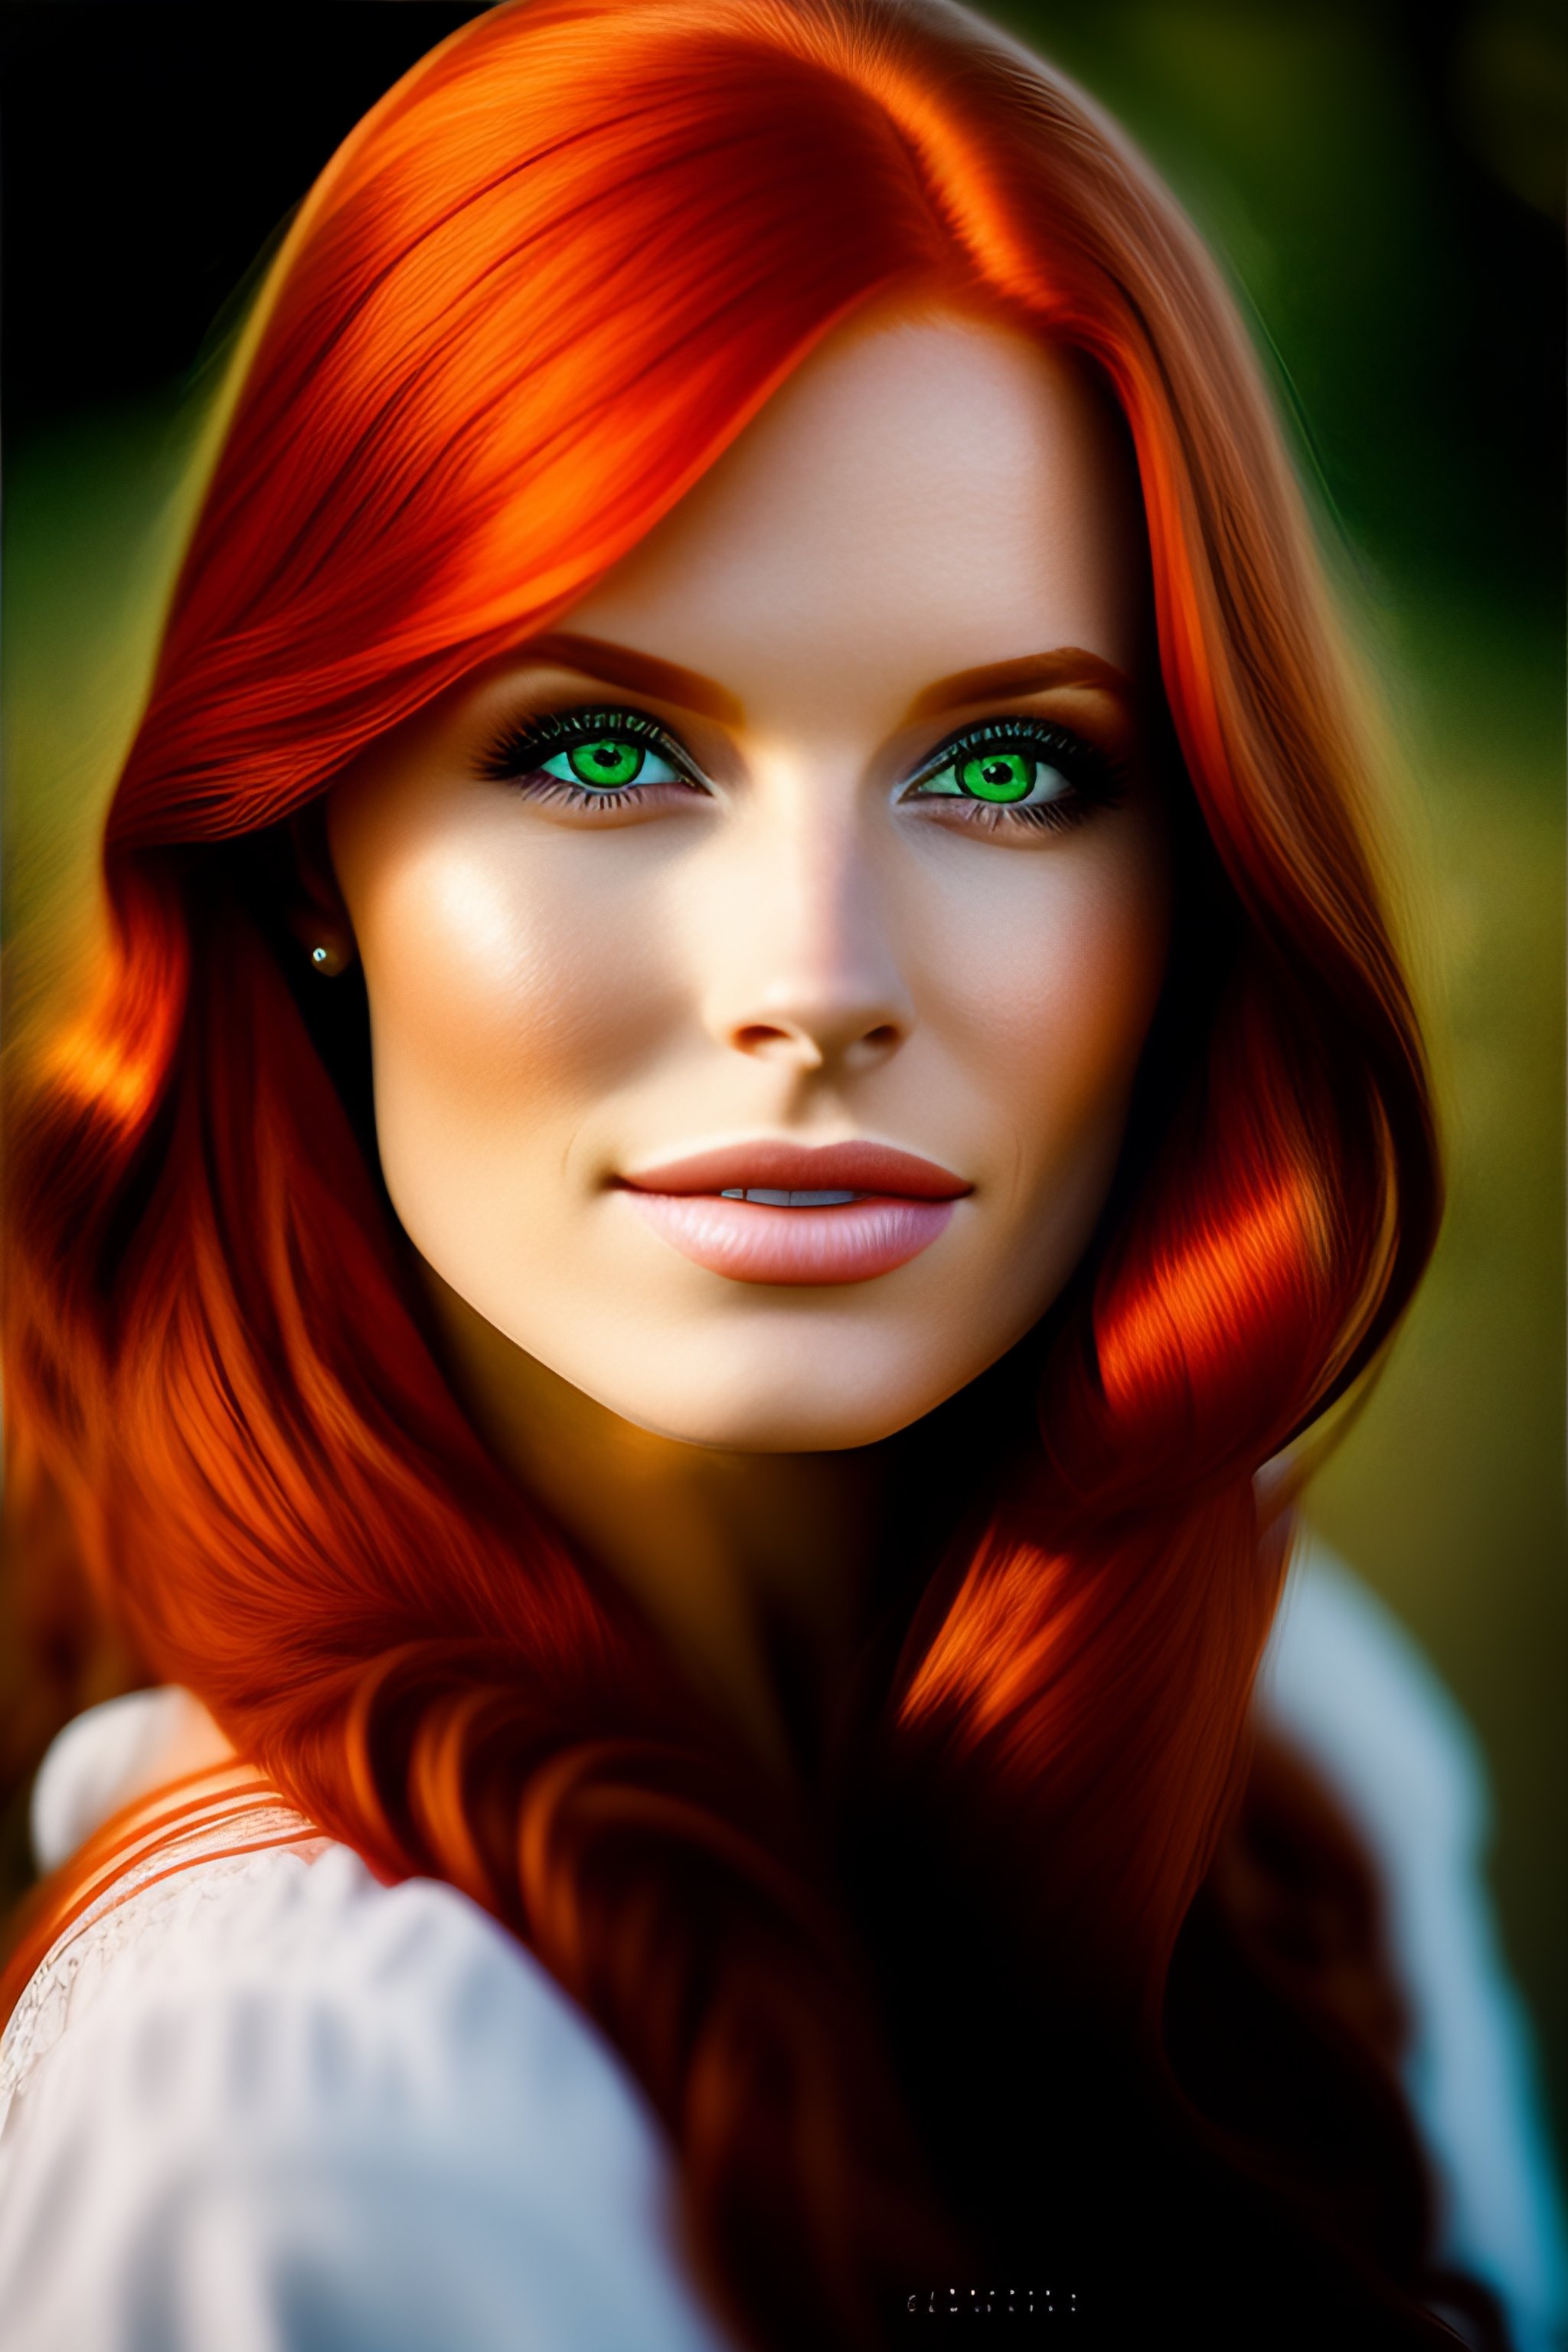 Lexica A Portrait Of A Redhead Beautiful Girl Green Eyes Highly Detailed 8 5 Mm F 1 2